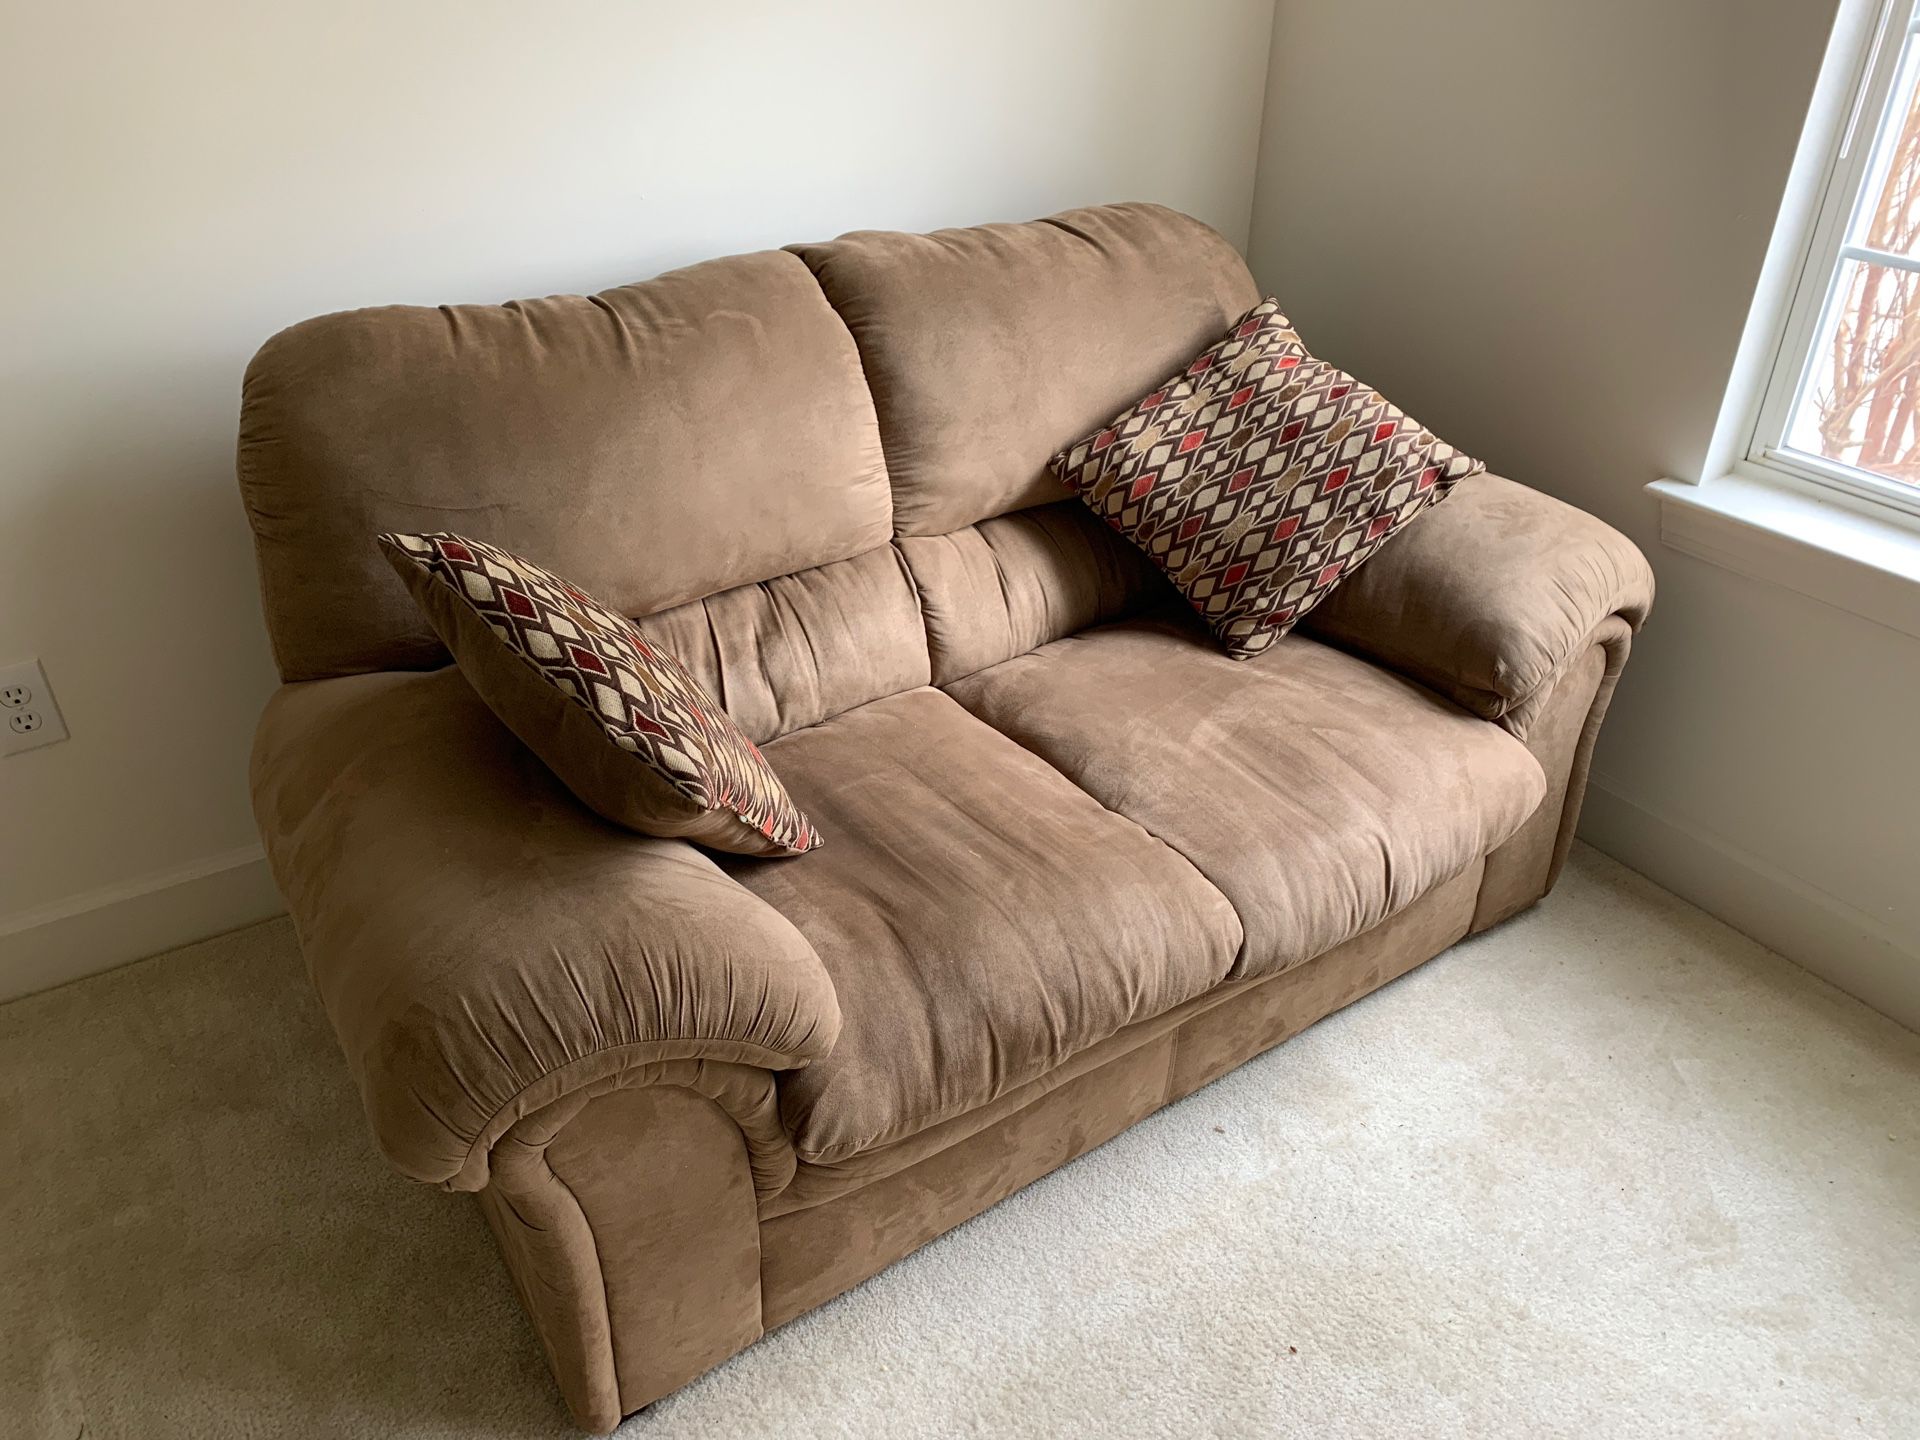 Free Sofa pickup only